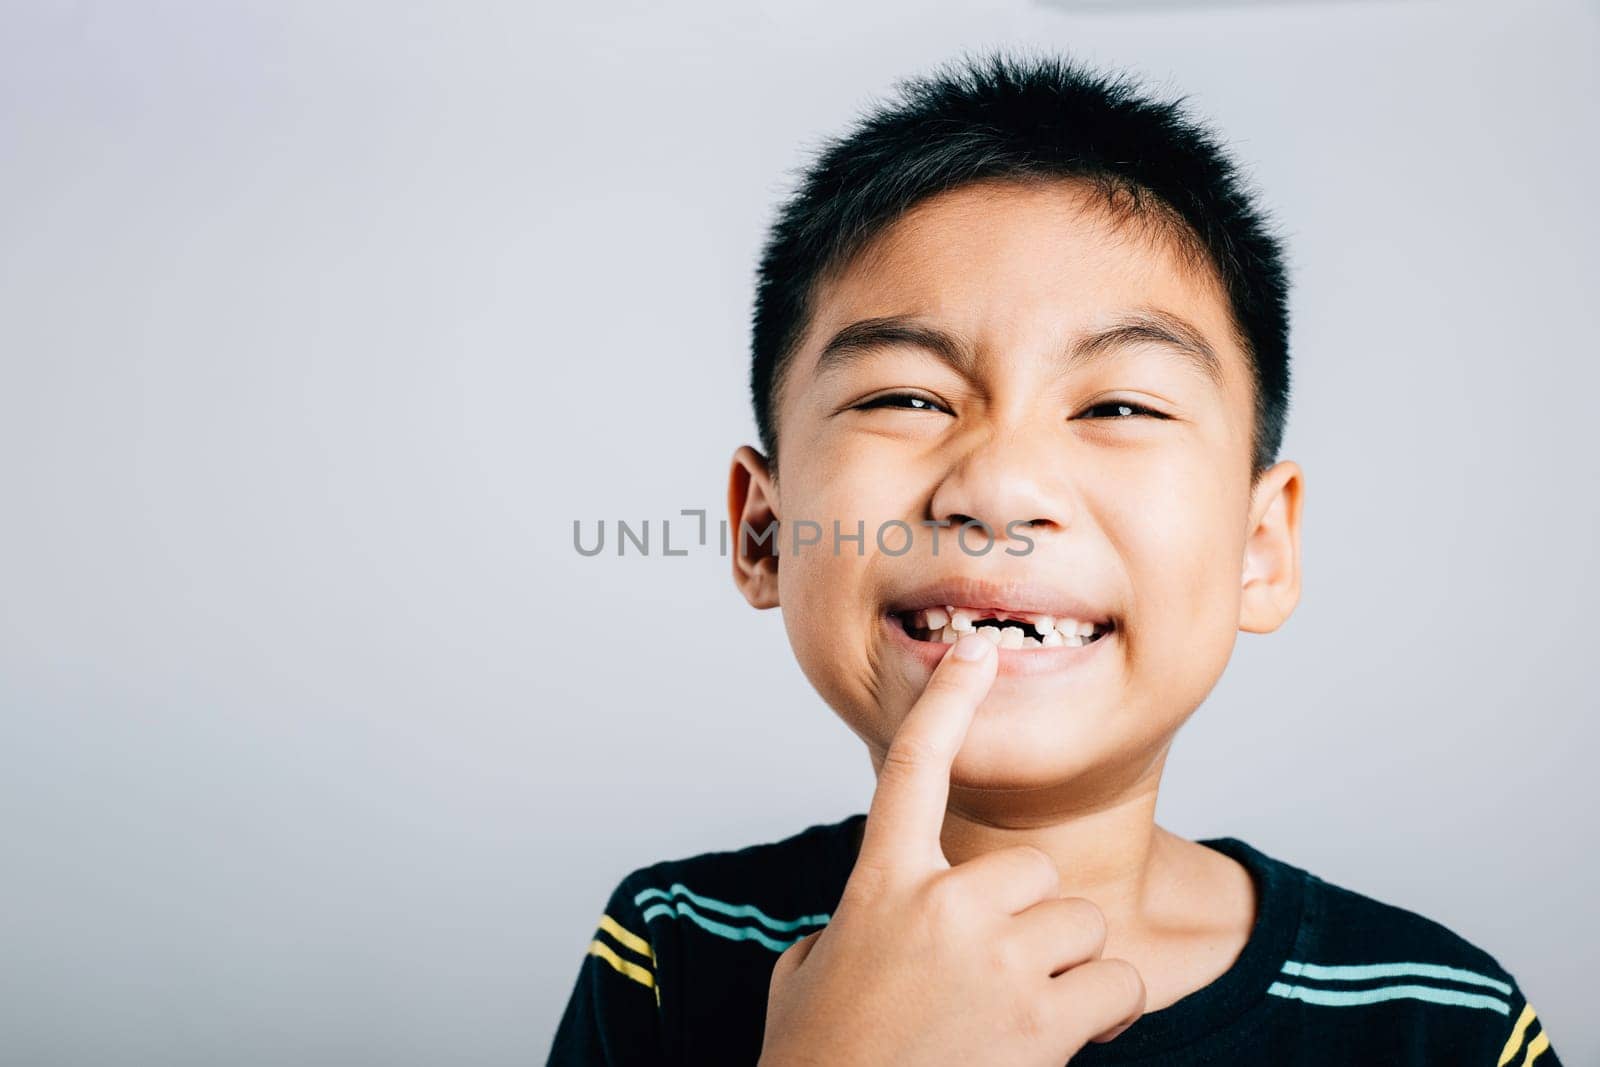 Adorable boy six smiling wide points to first permanent molar gap. cheerful portrait showcasing child dental growth exfoliation and happy phase of losing baby teeth. teeth new gap dentist problems by Sorapop